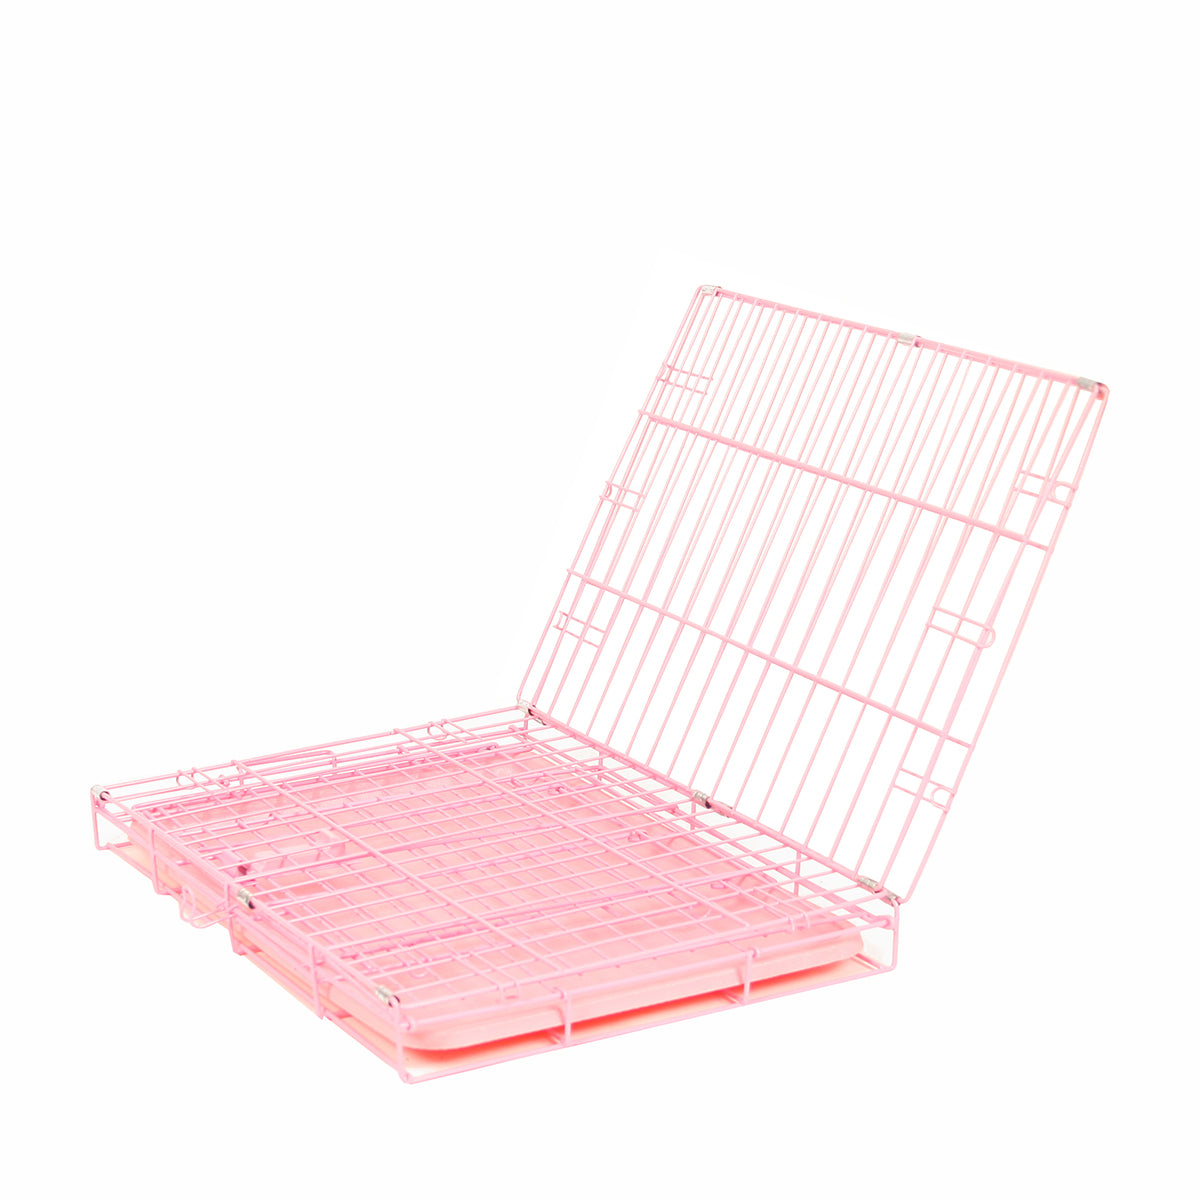 Small Pink Dog Crate